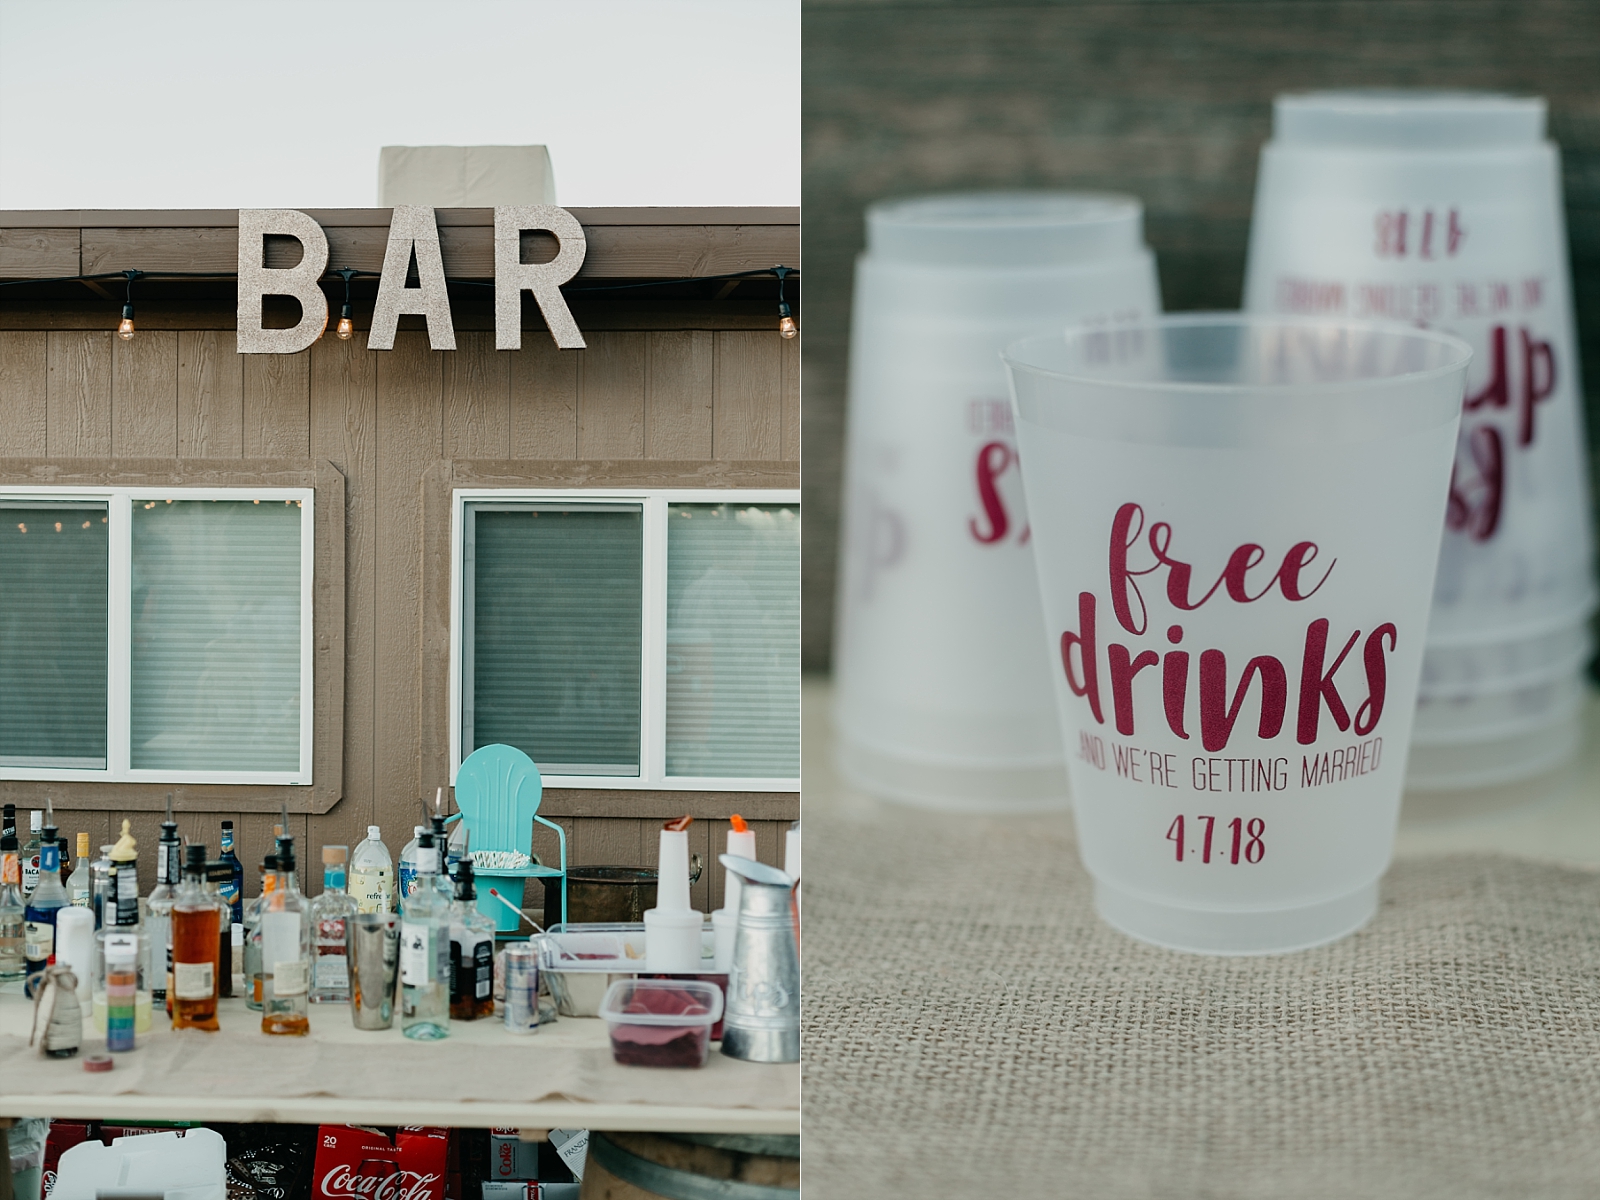 DIY bar letters sign free drinks and we're getting married personalized cups Reception details backyard Wedding Photos Prescott, Arizona Samantha Patri Photography